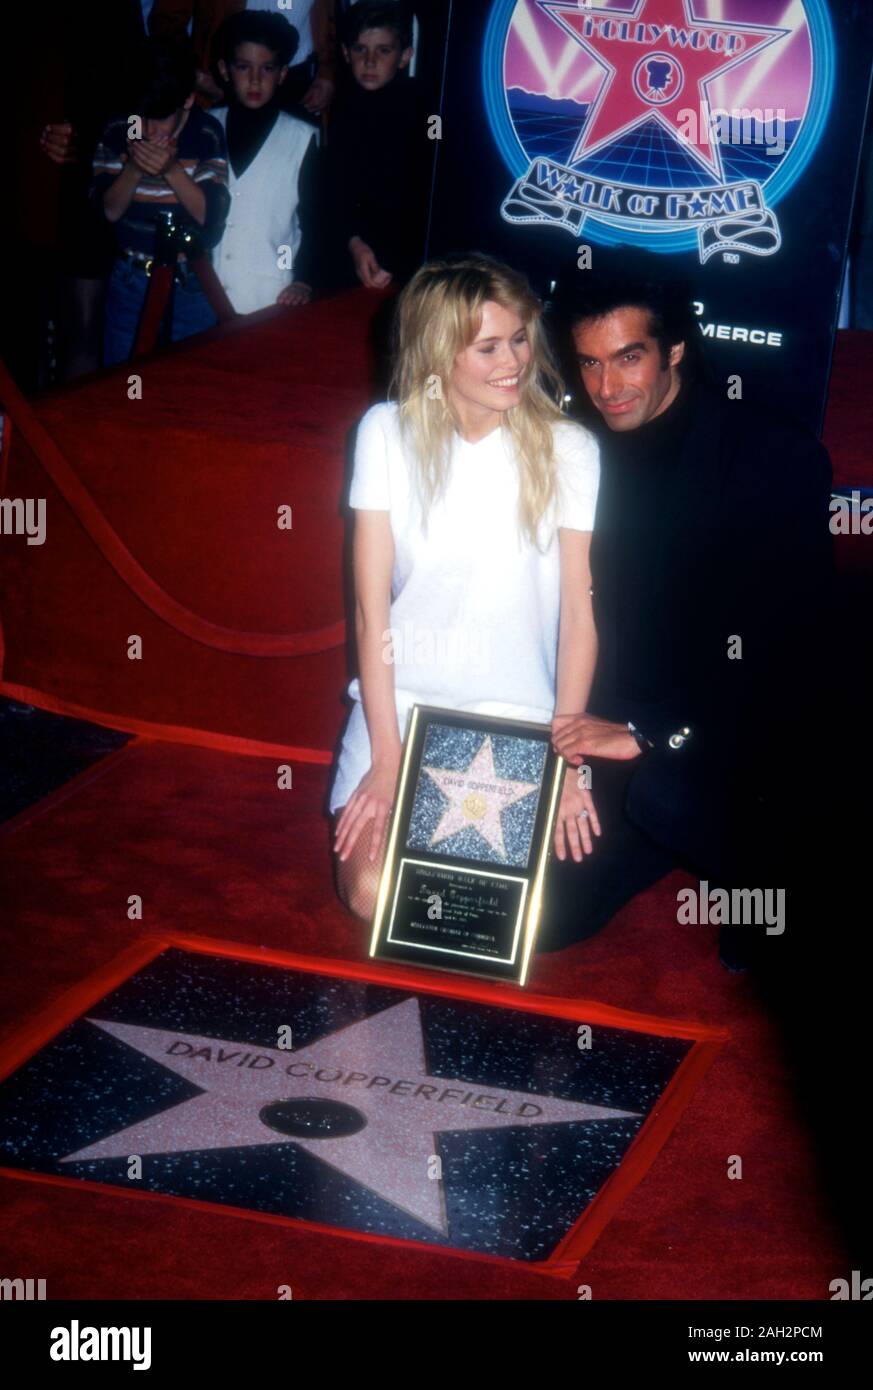 Hollywood, California, USA 25th April 1995 American Illusionist David Copperfield and model Claudia Schiffer attend David Copperfield's Hollywood Walk of Fame Star Ceremony on April 25, 1995 at 7001 Hollywood Blvd. in Hollywood, California, USA. Photo by Barry King/Alamy Stock Photo Stock Photo